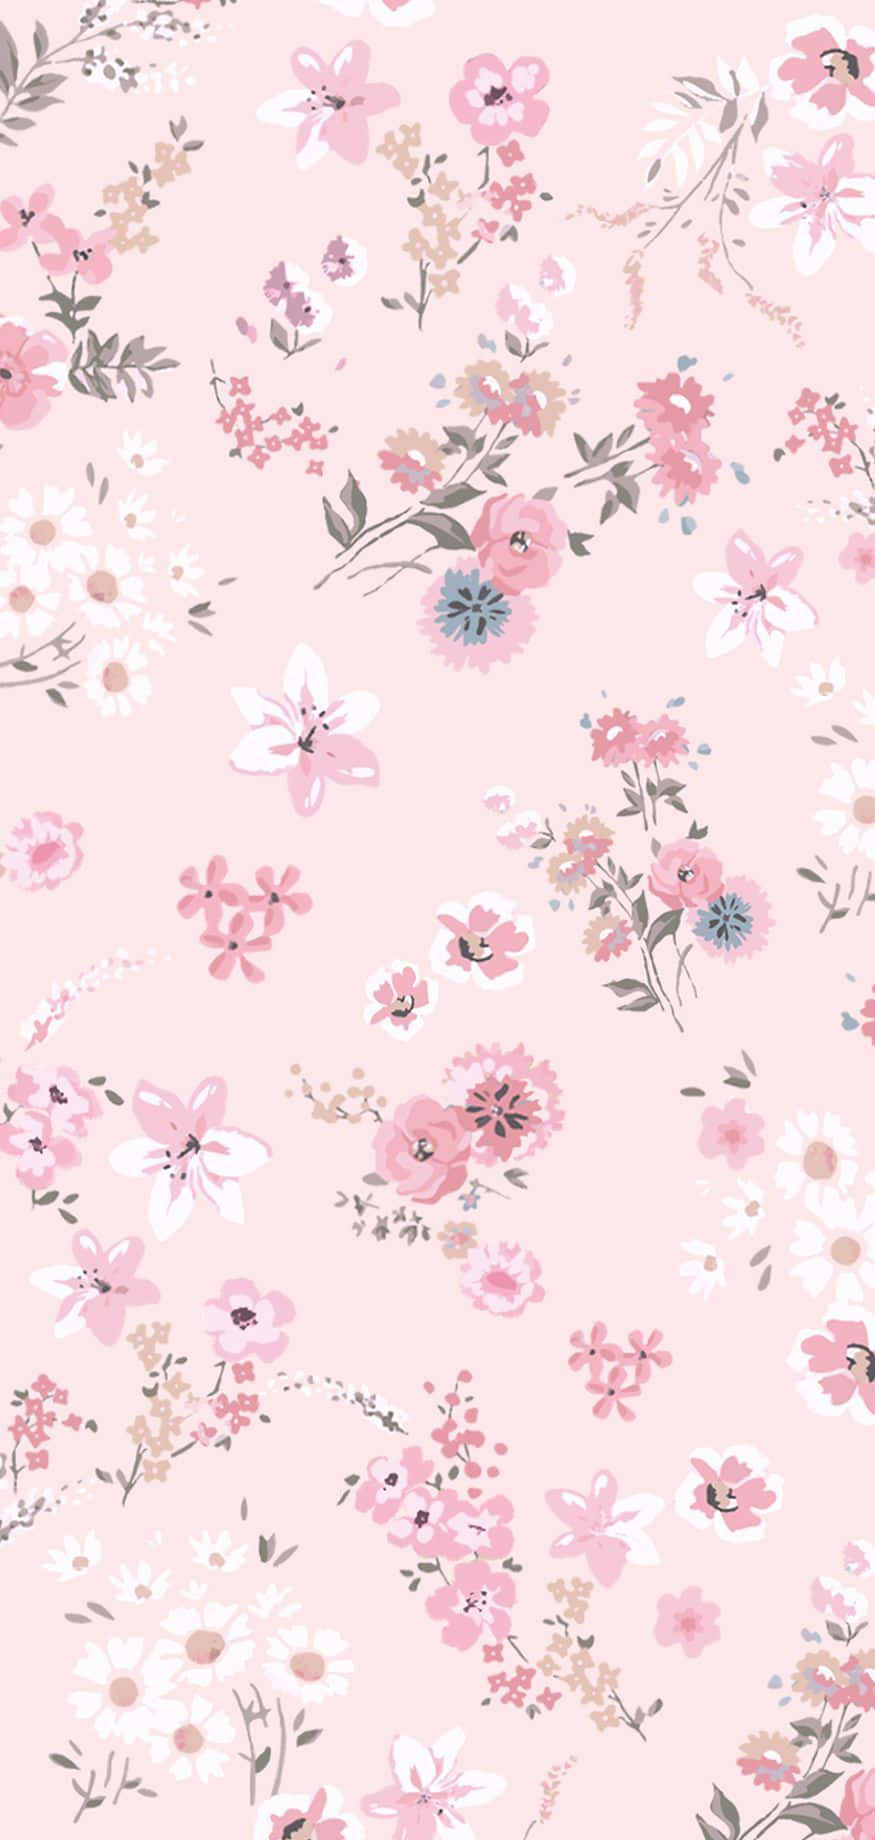 A Pink Floral Pattern With Blue Flowers Wallpaper